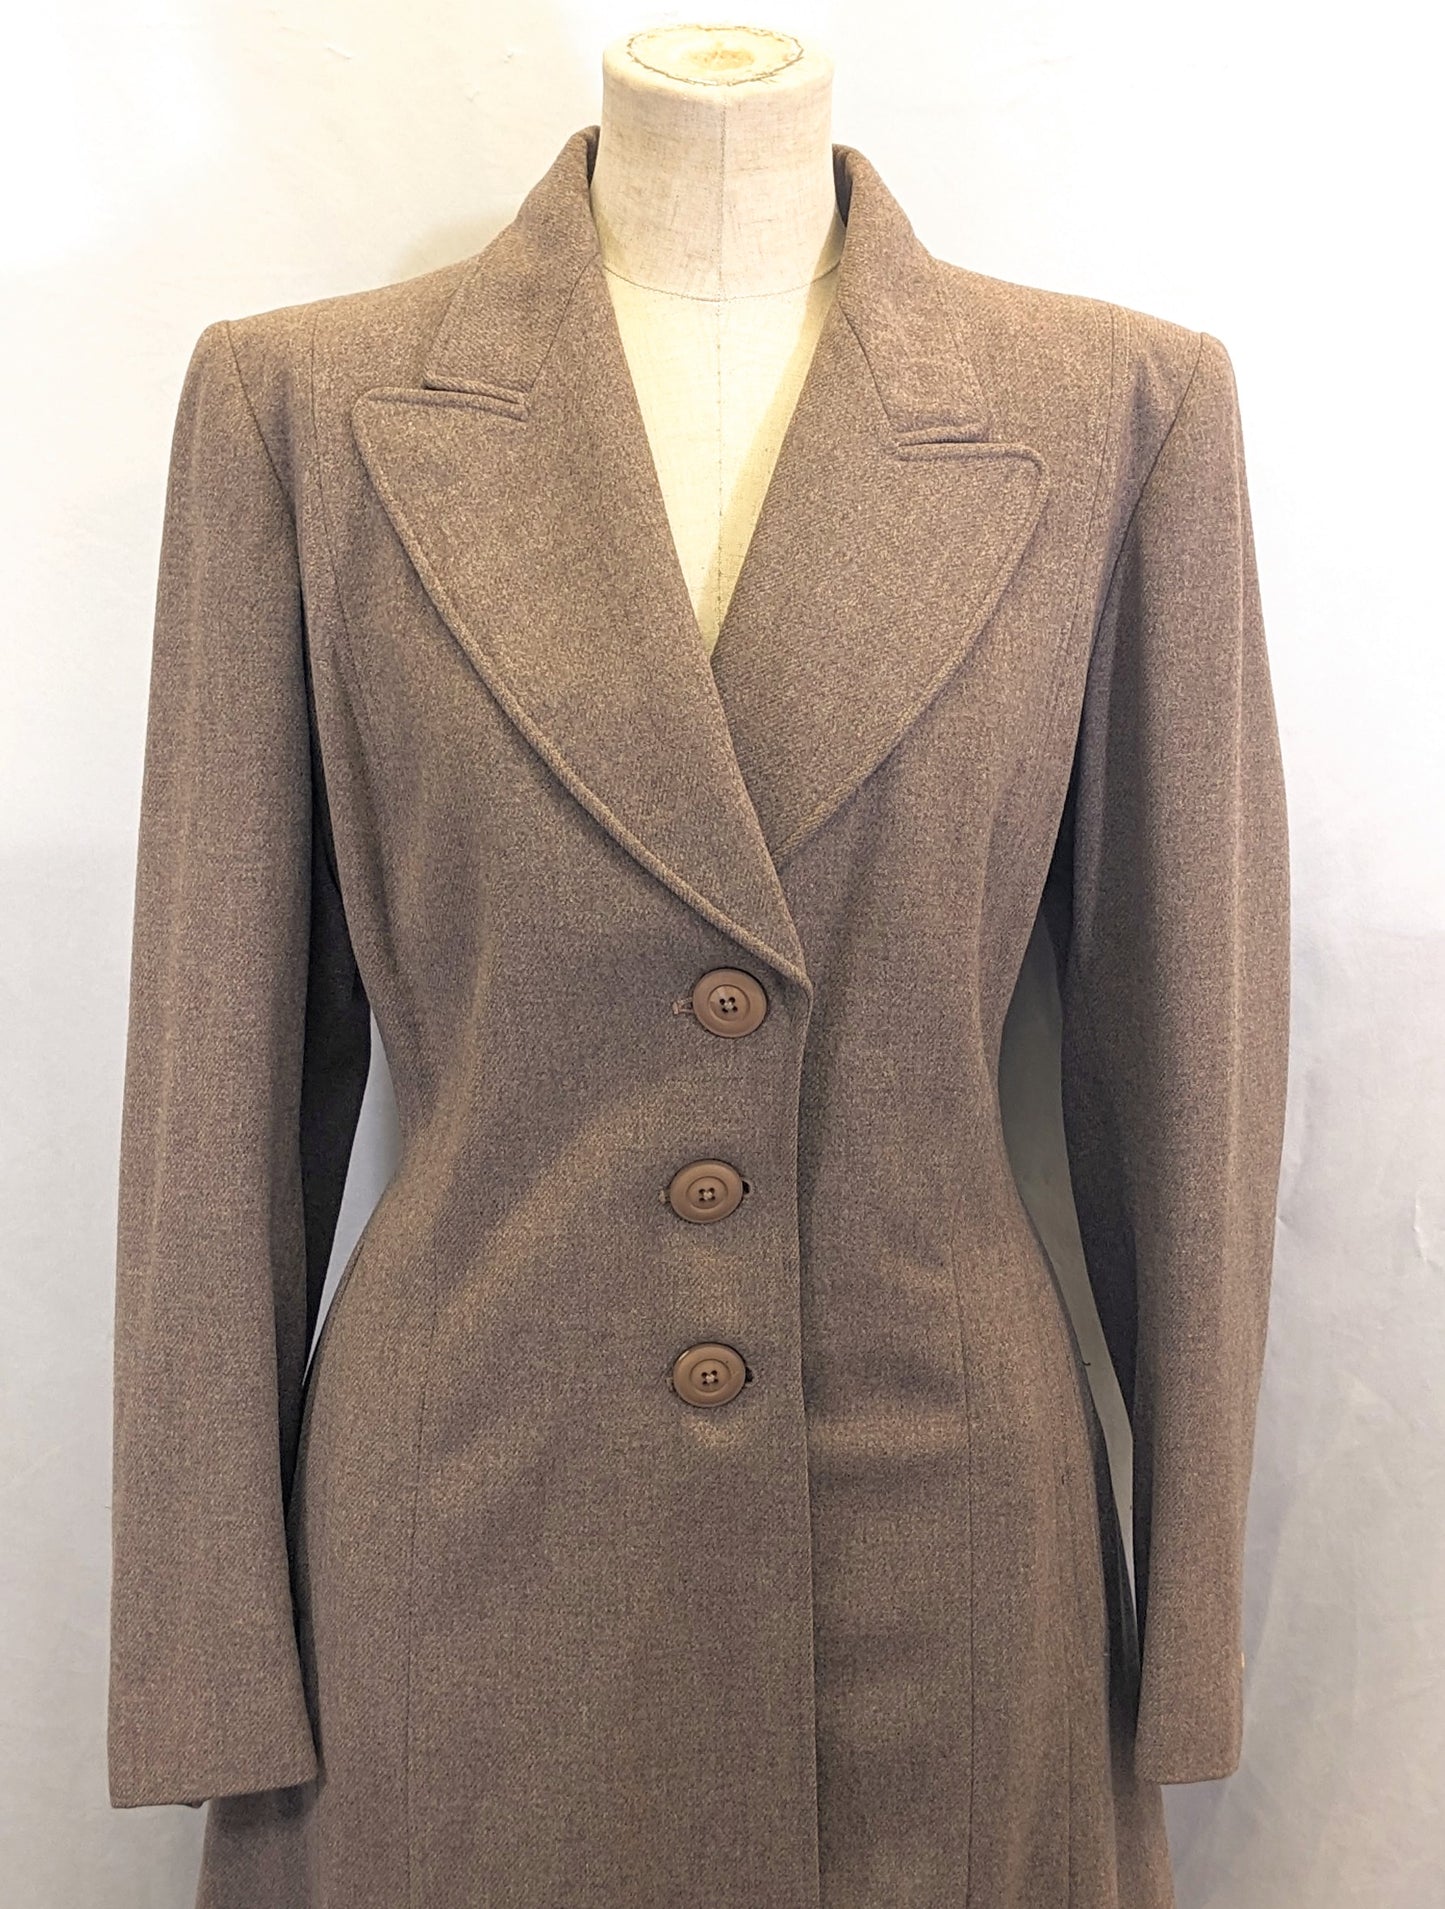 Late 1930s/Early 1940s Coat